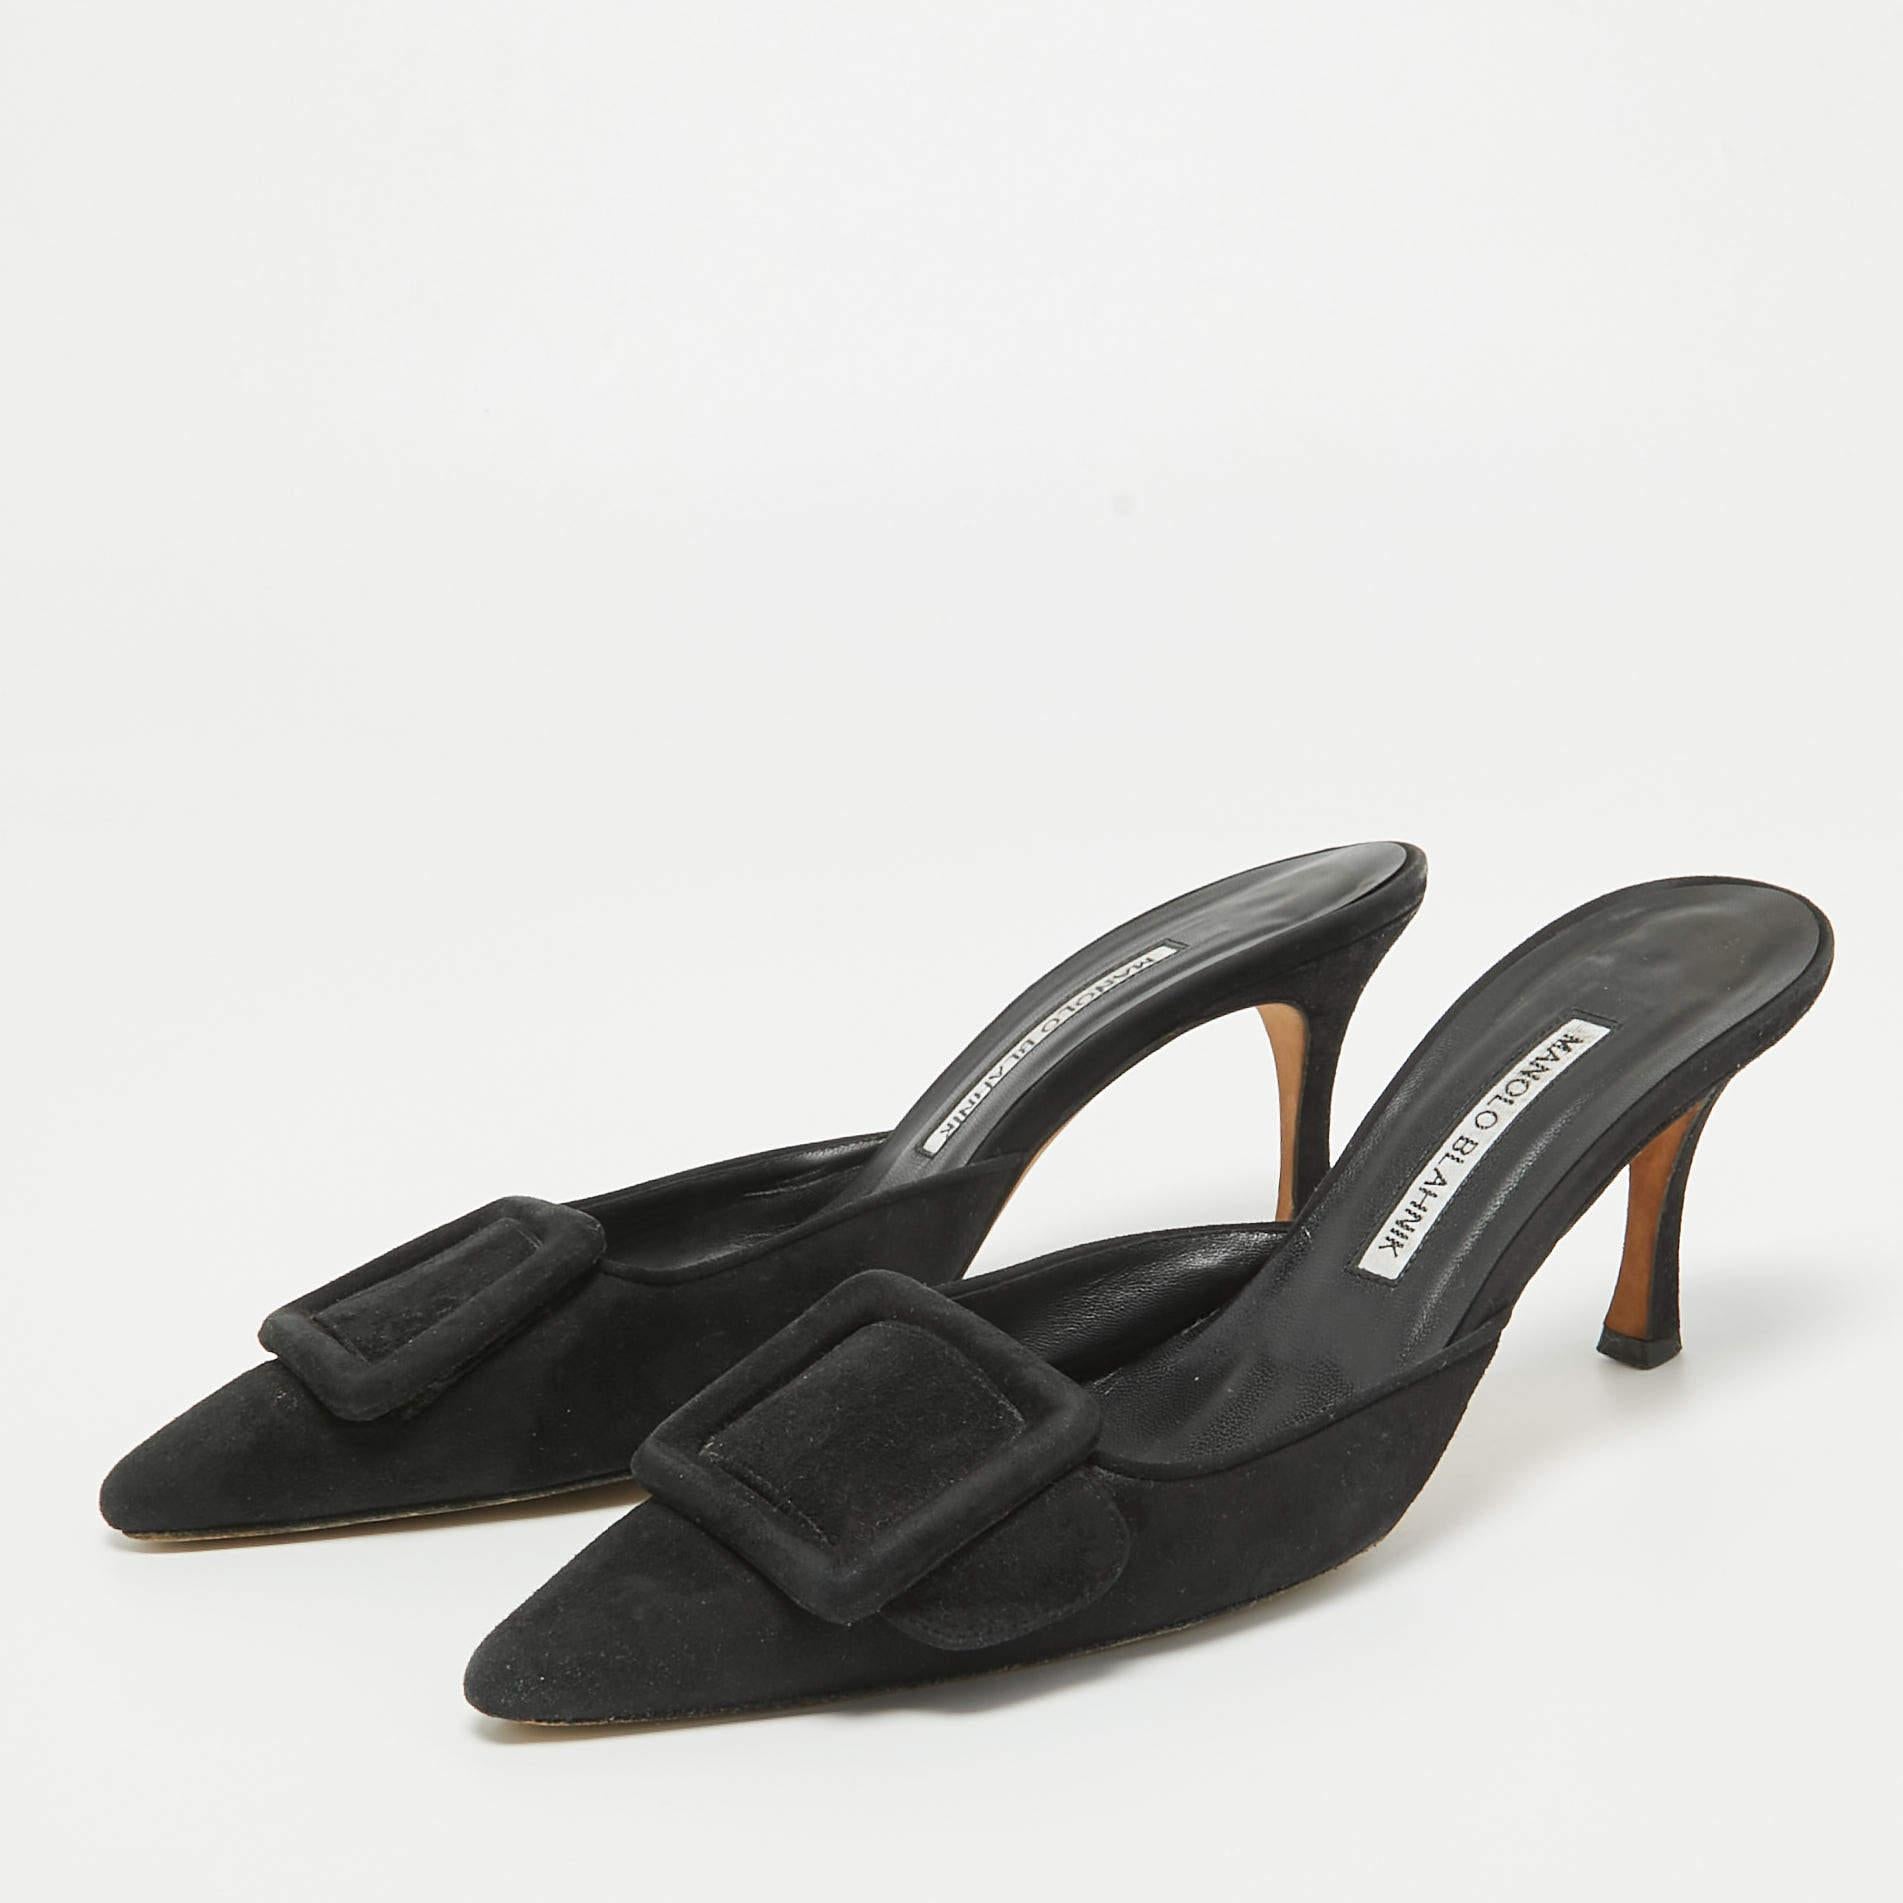 You can count on these Manolo Blahnik mules for an elevated feel. They are crafted beautifully and designed to offer the right fit and a comfortable lift.

